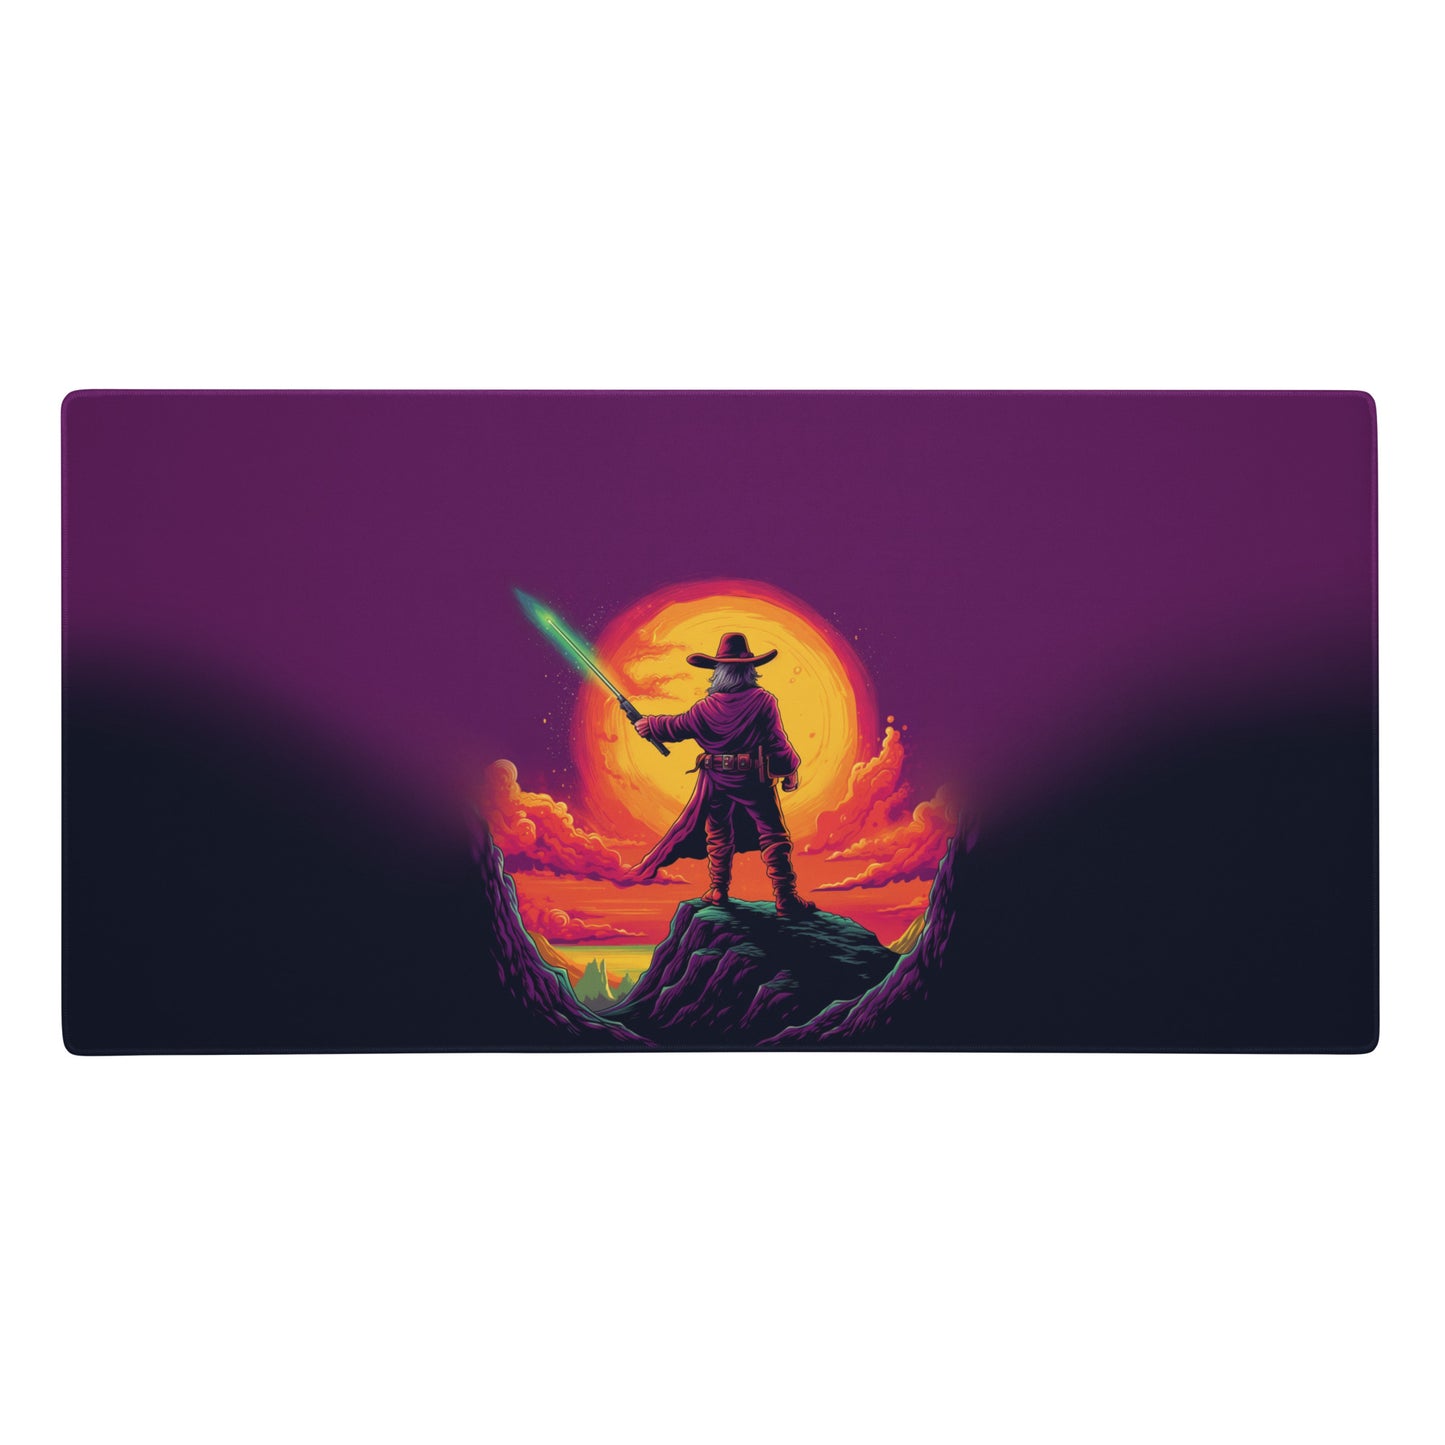 A 36" x 18" desk pad with a cowboy holding a glowing sword looking at the sunset.